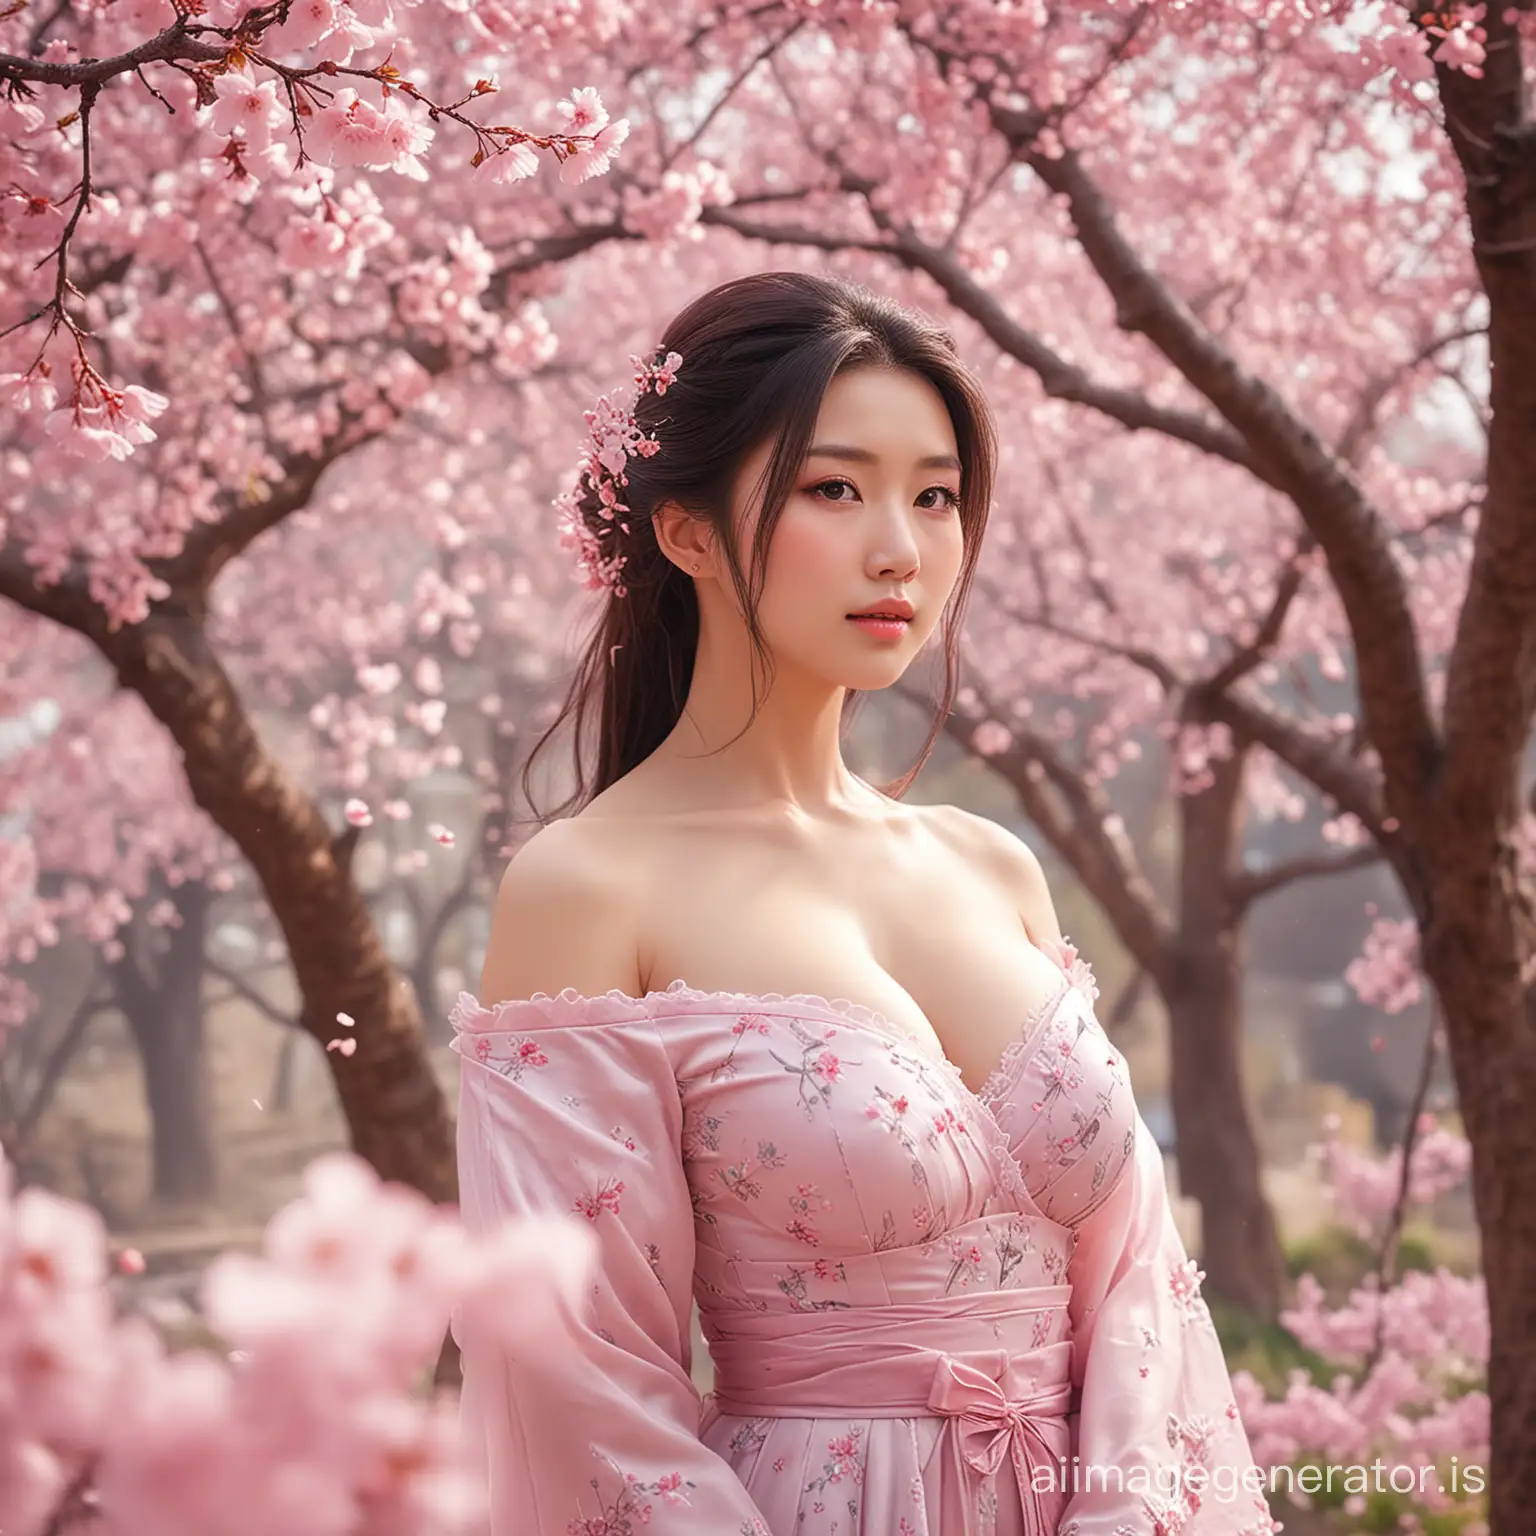 a korean woman, very, very big breasts, firm breasts, standing under a tree with pink flowers, cherry blossom background, realistic fantasy photography, cherry blossom petals, beautiful aerith gainborough, cherry blossoms blowing in the wind, beautiful fantasy girl , cherry blossoms, cherry blossoms, cherry blossoms in the background, cherry blossoms, lost in a beautiful fairy landscape,” beautiful anime woman, ethereal fairy tale, by Anna Katharina Block